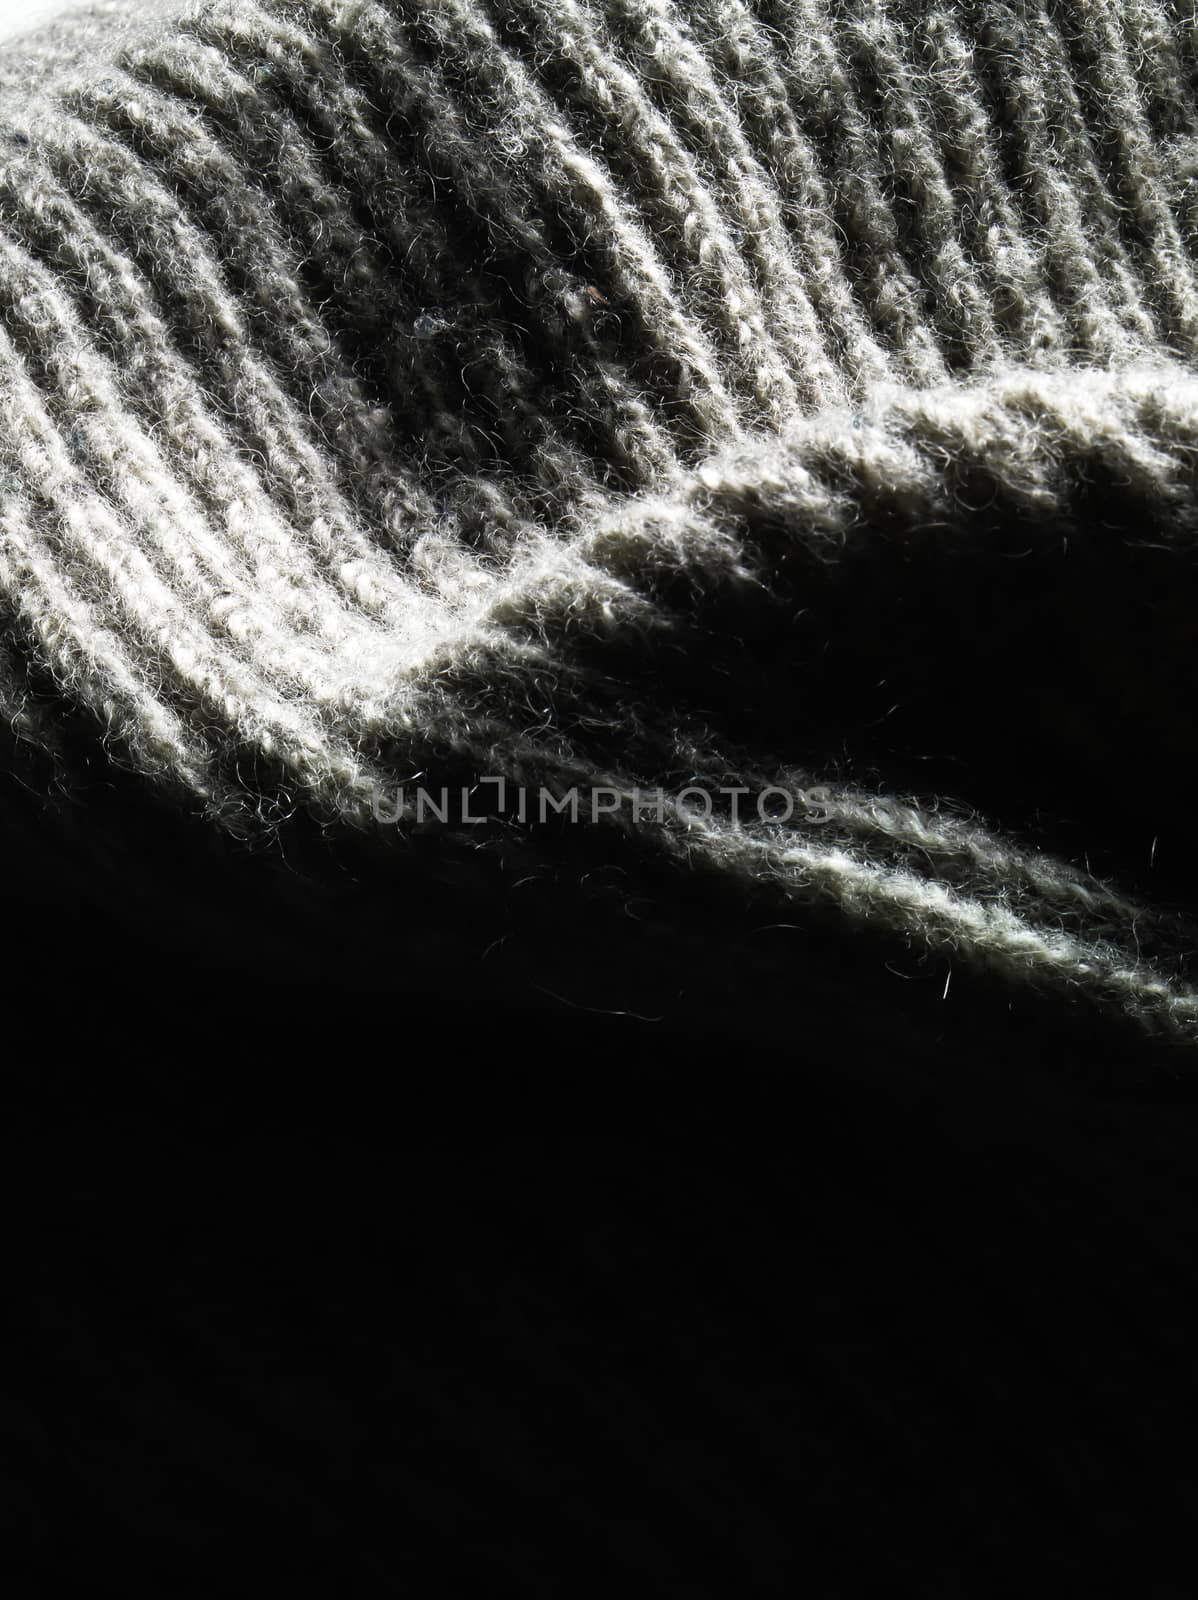 A detail on the wool texture of a pullover